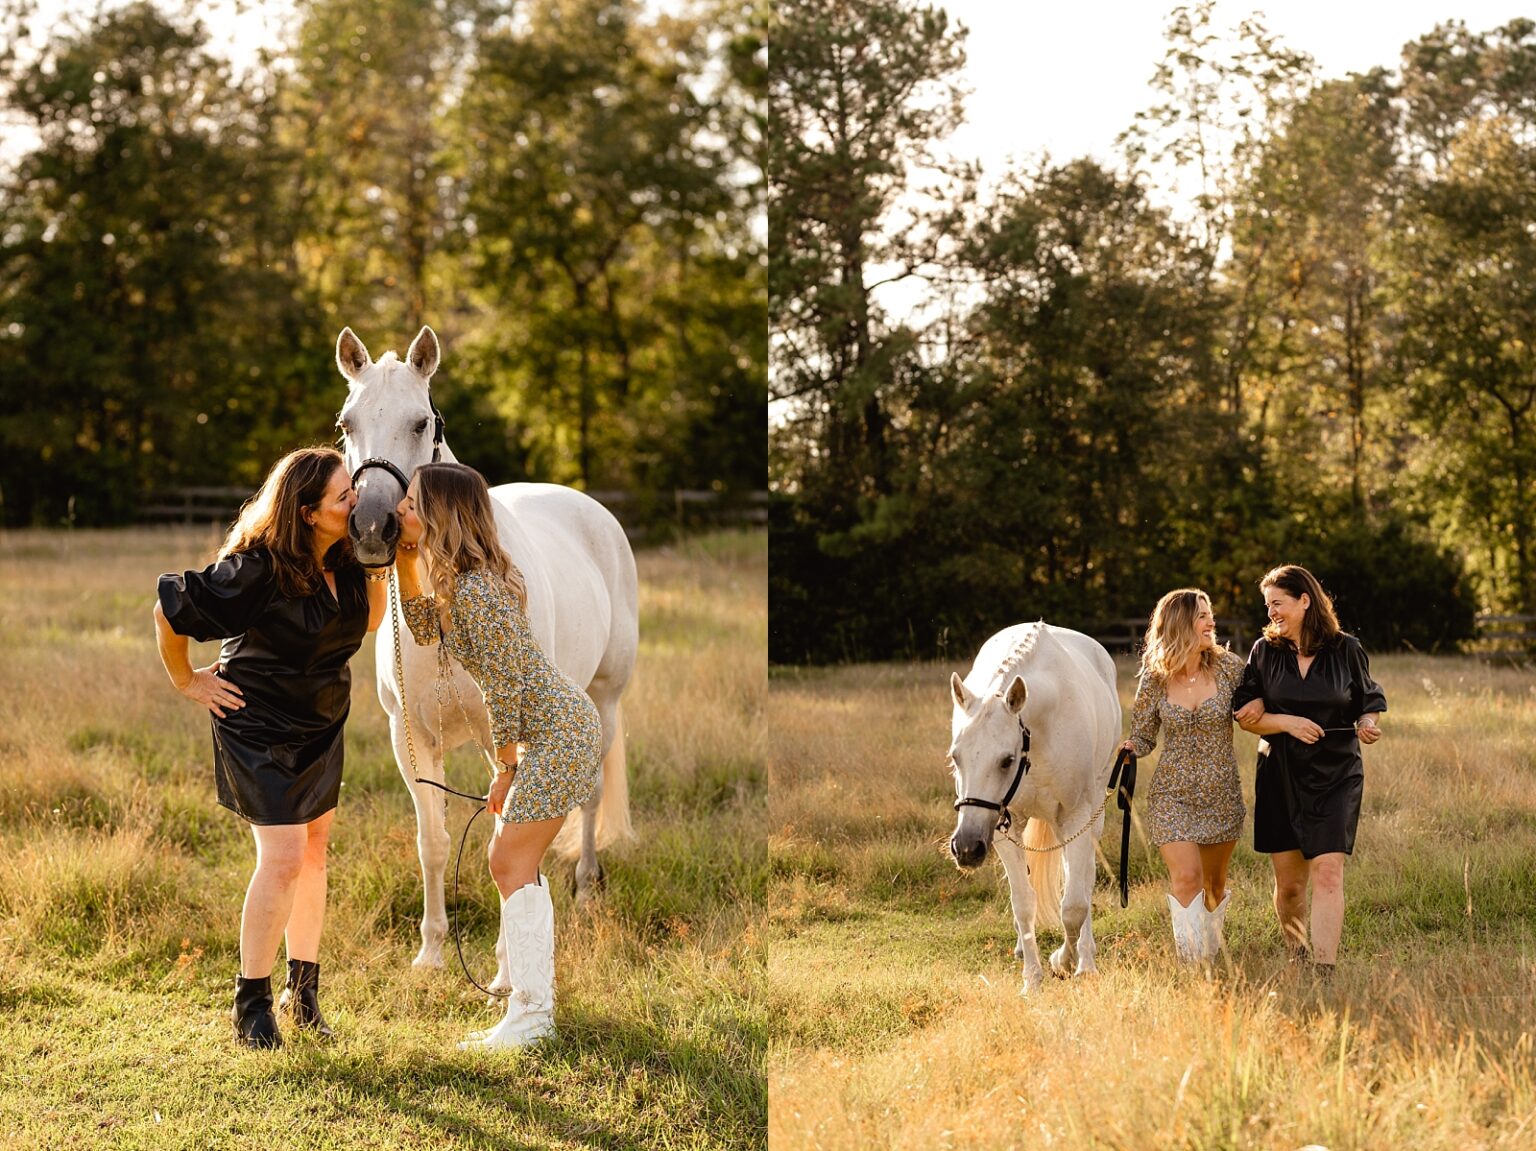 Girl and her mom have photos taken with their horse near Jacksonville FL.